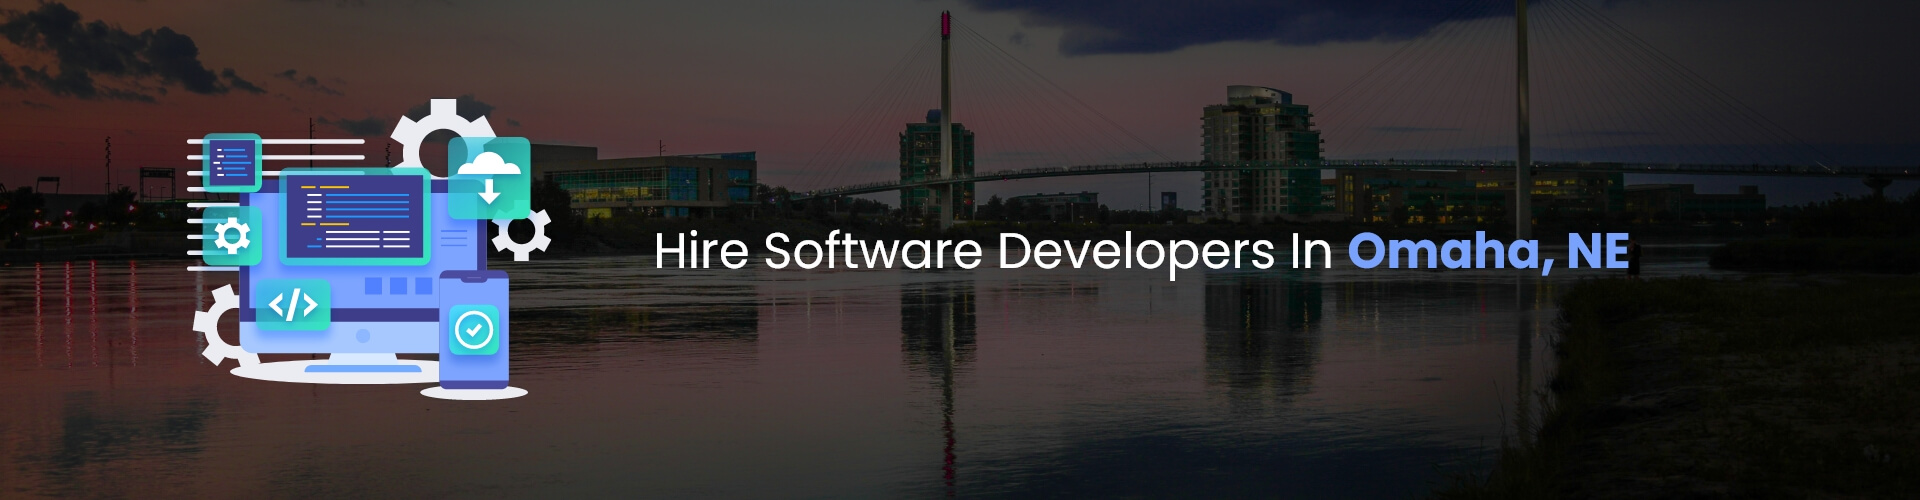 hire software developers in omaha